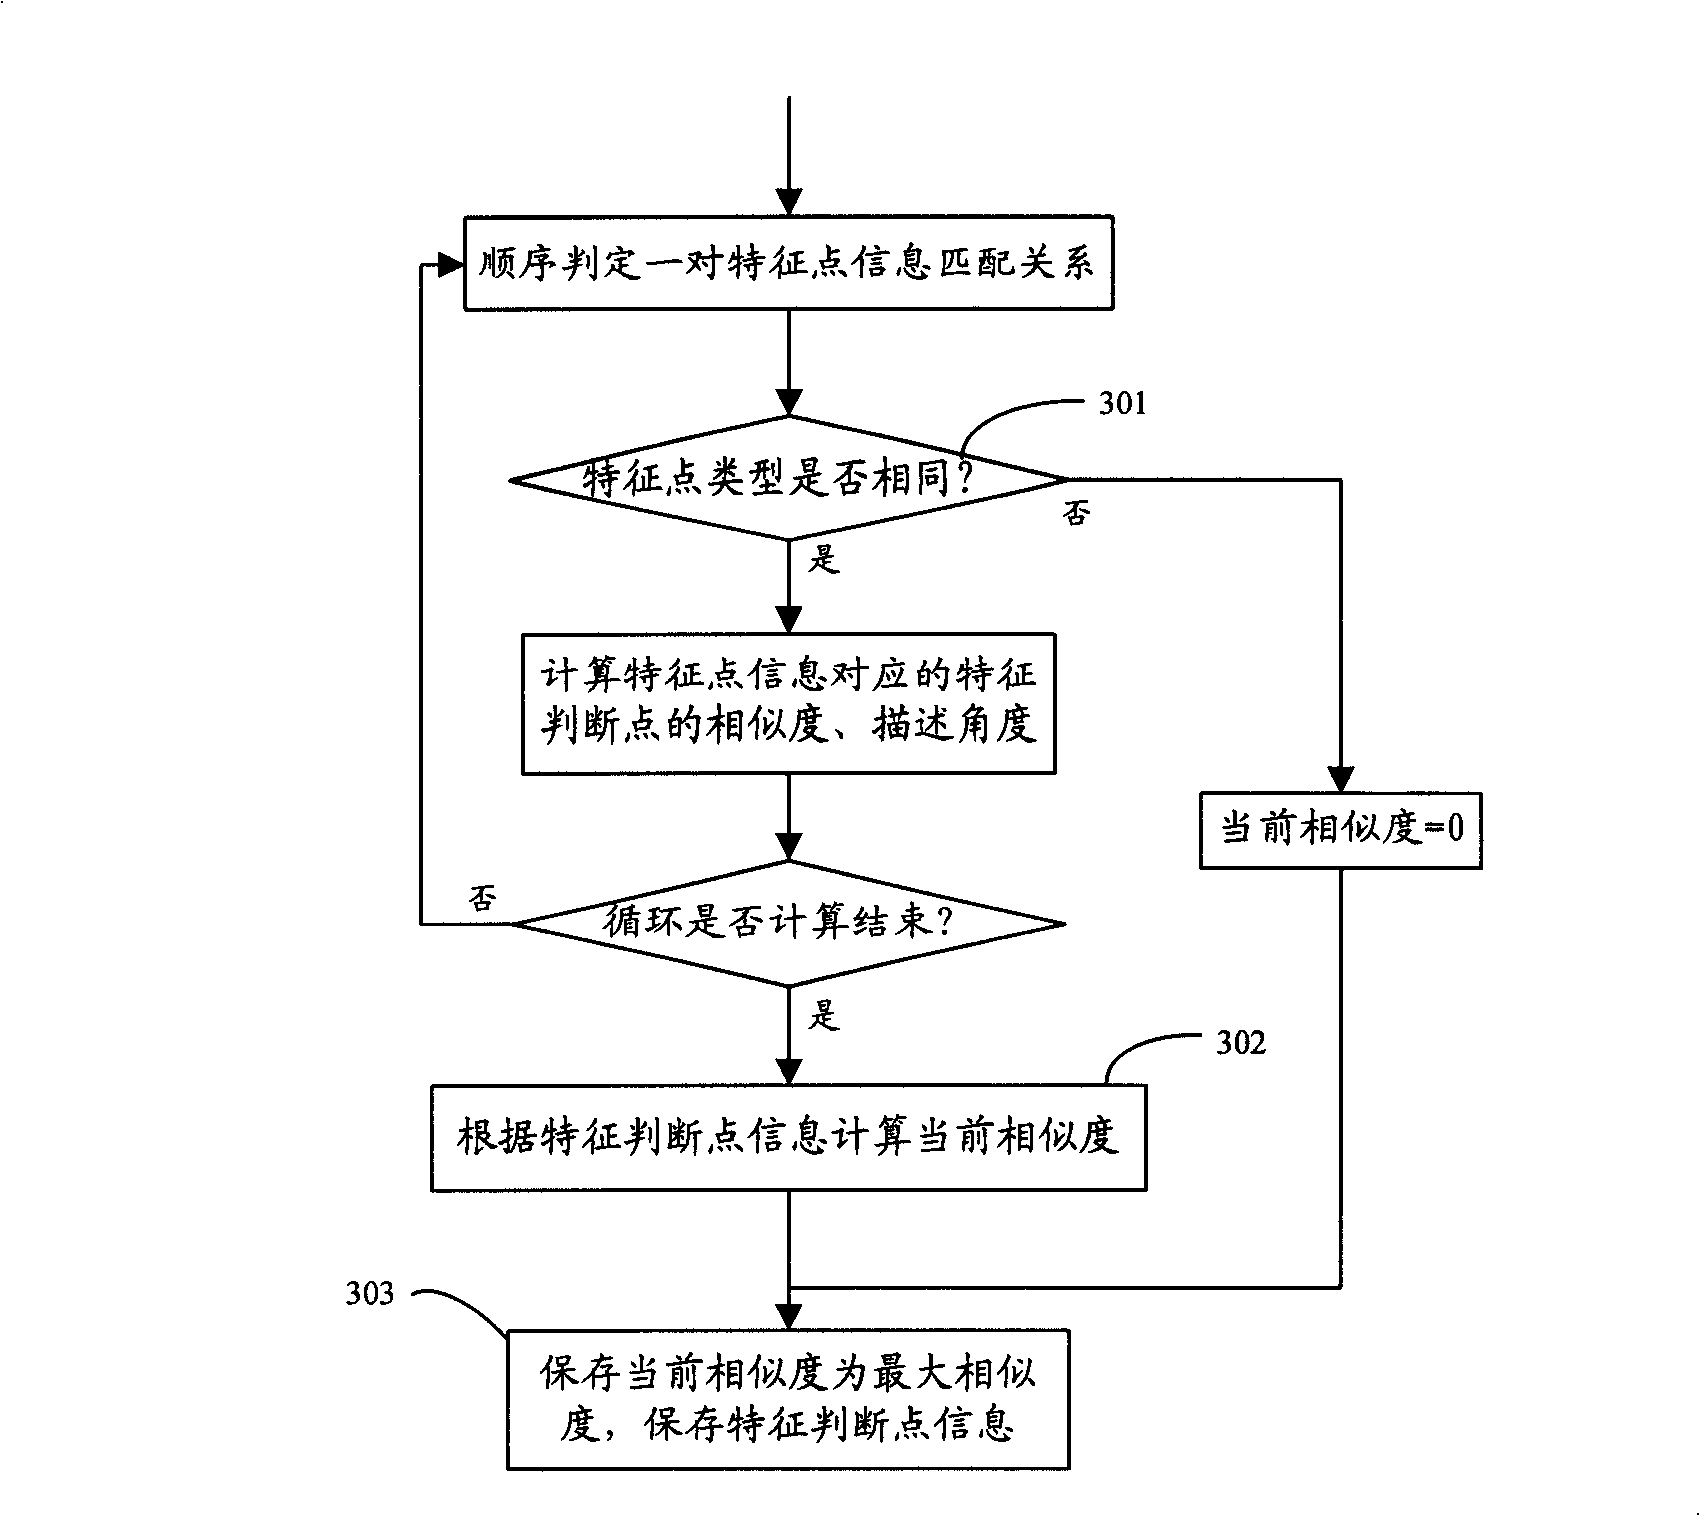 Method and device for recognizing plane geometrical shapes